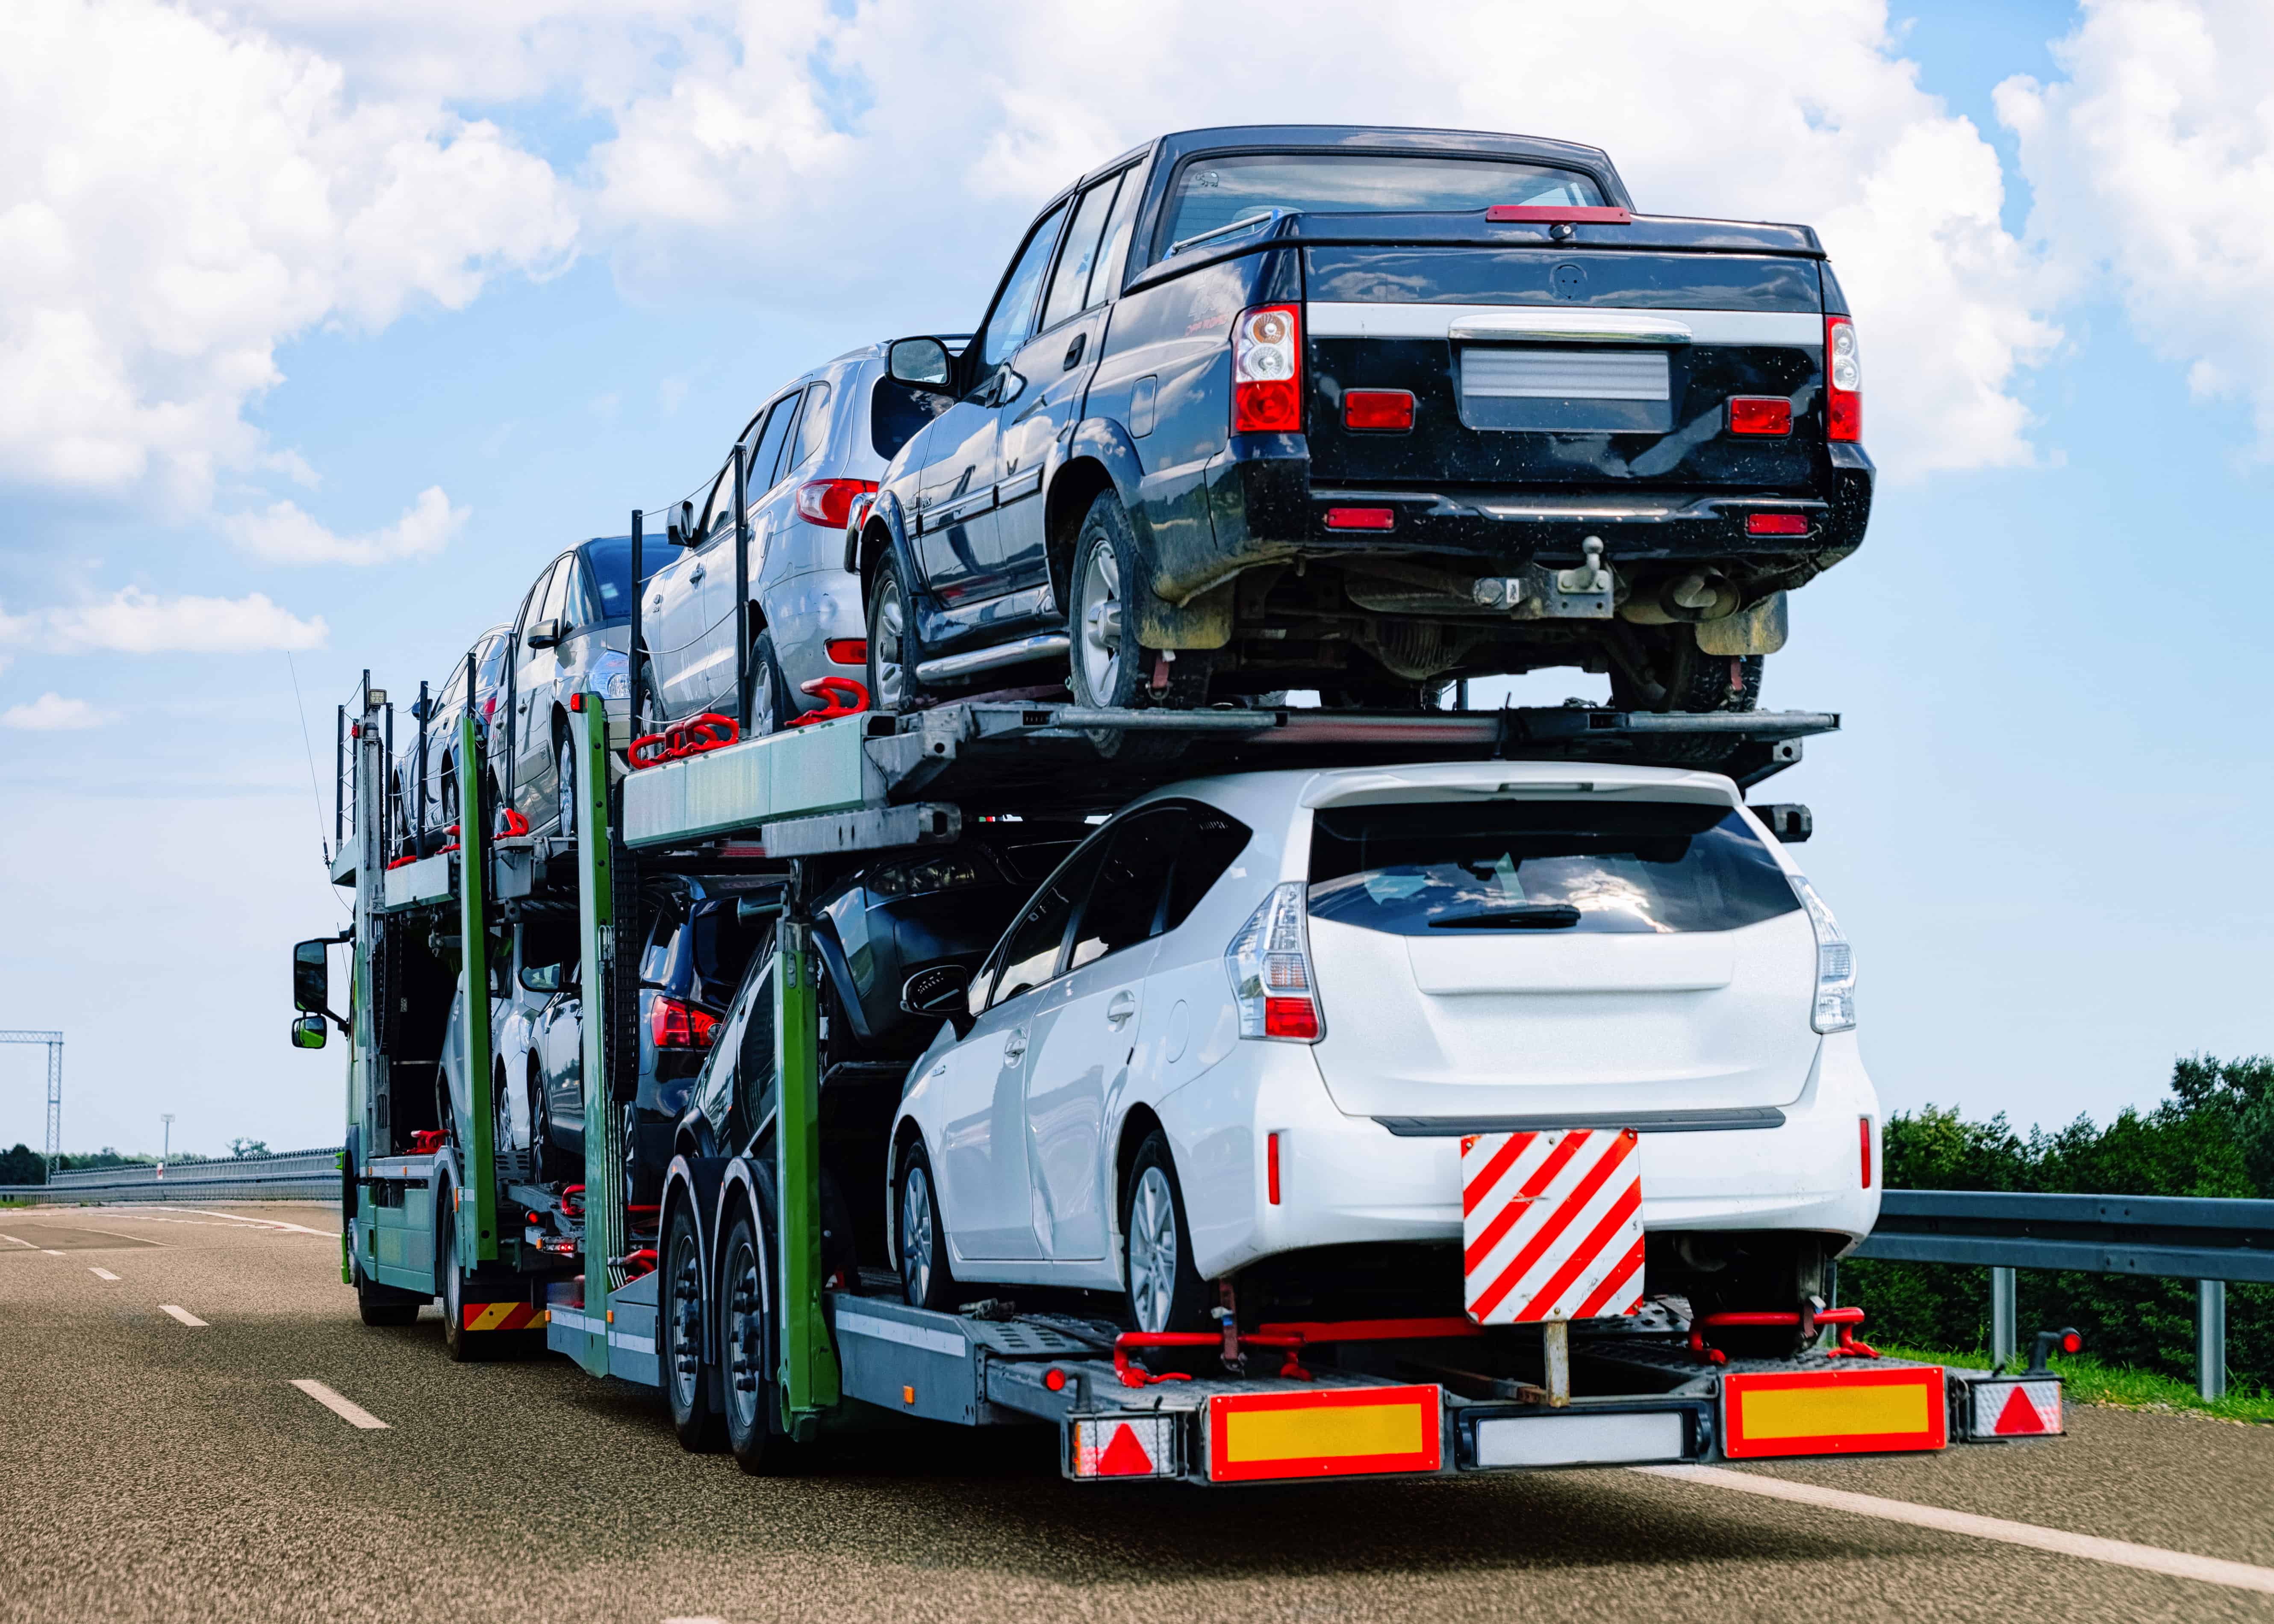 Tow truck transporting many vehicles